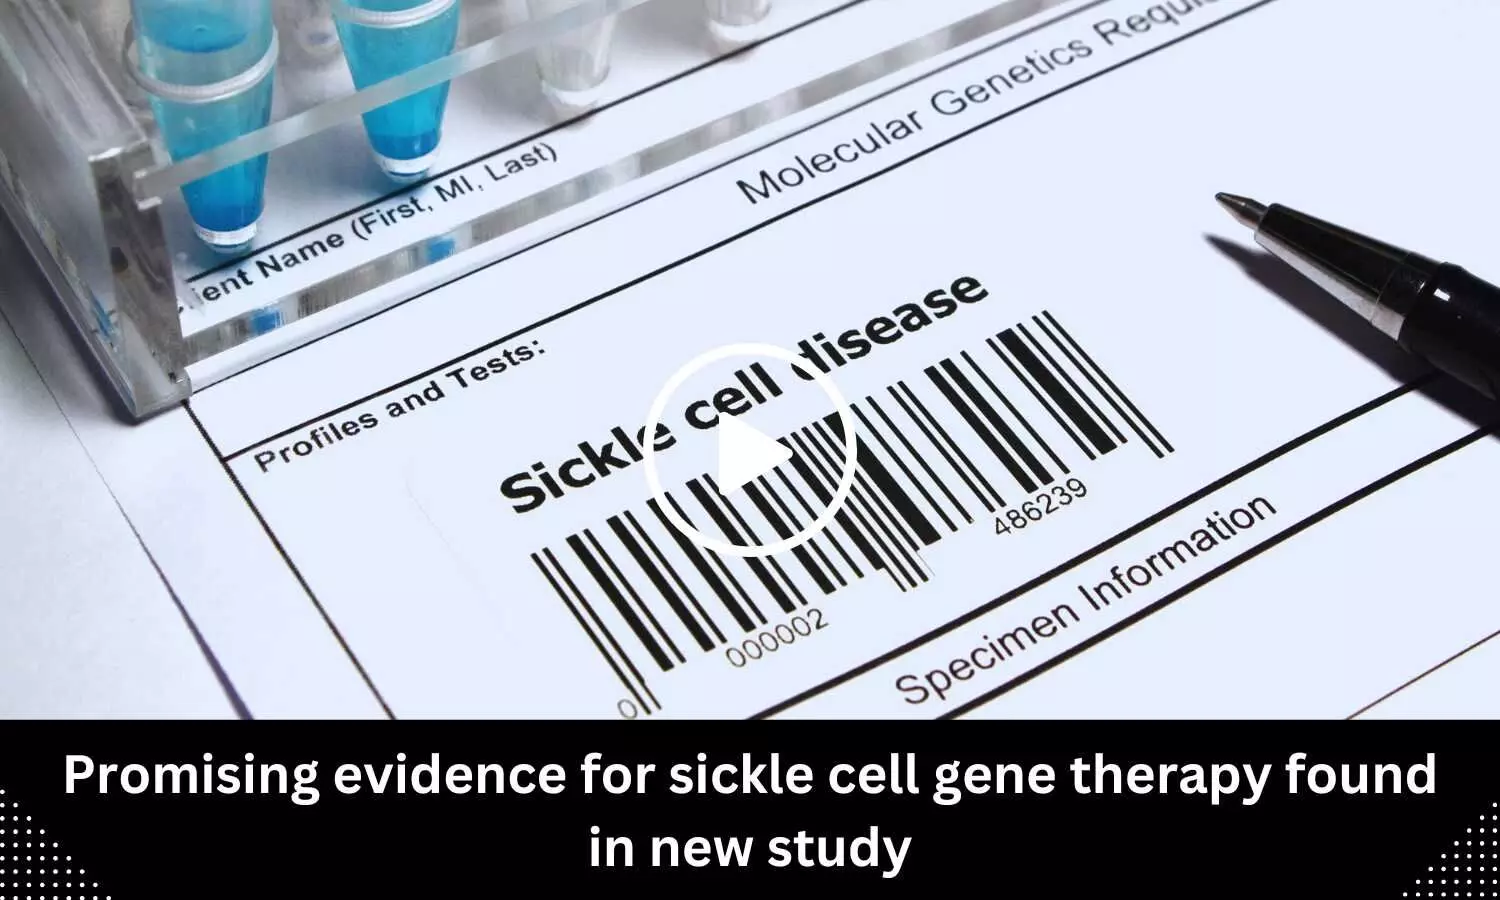 Promising evidence for sickle cell gene therapy found in new study